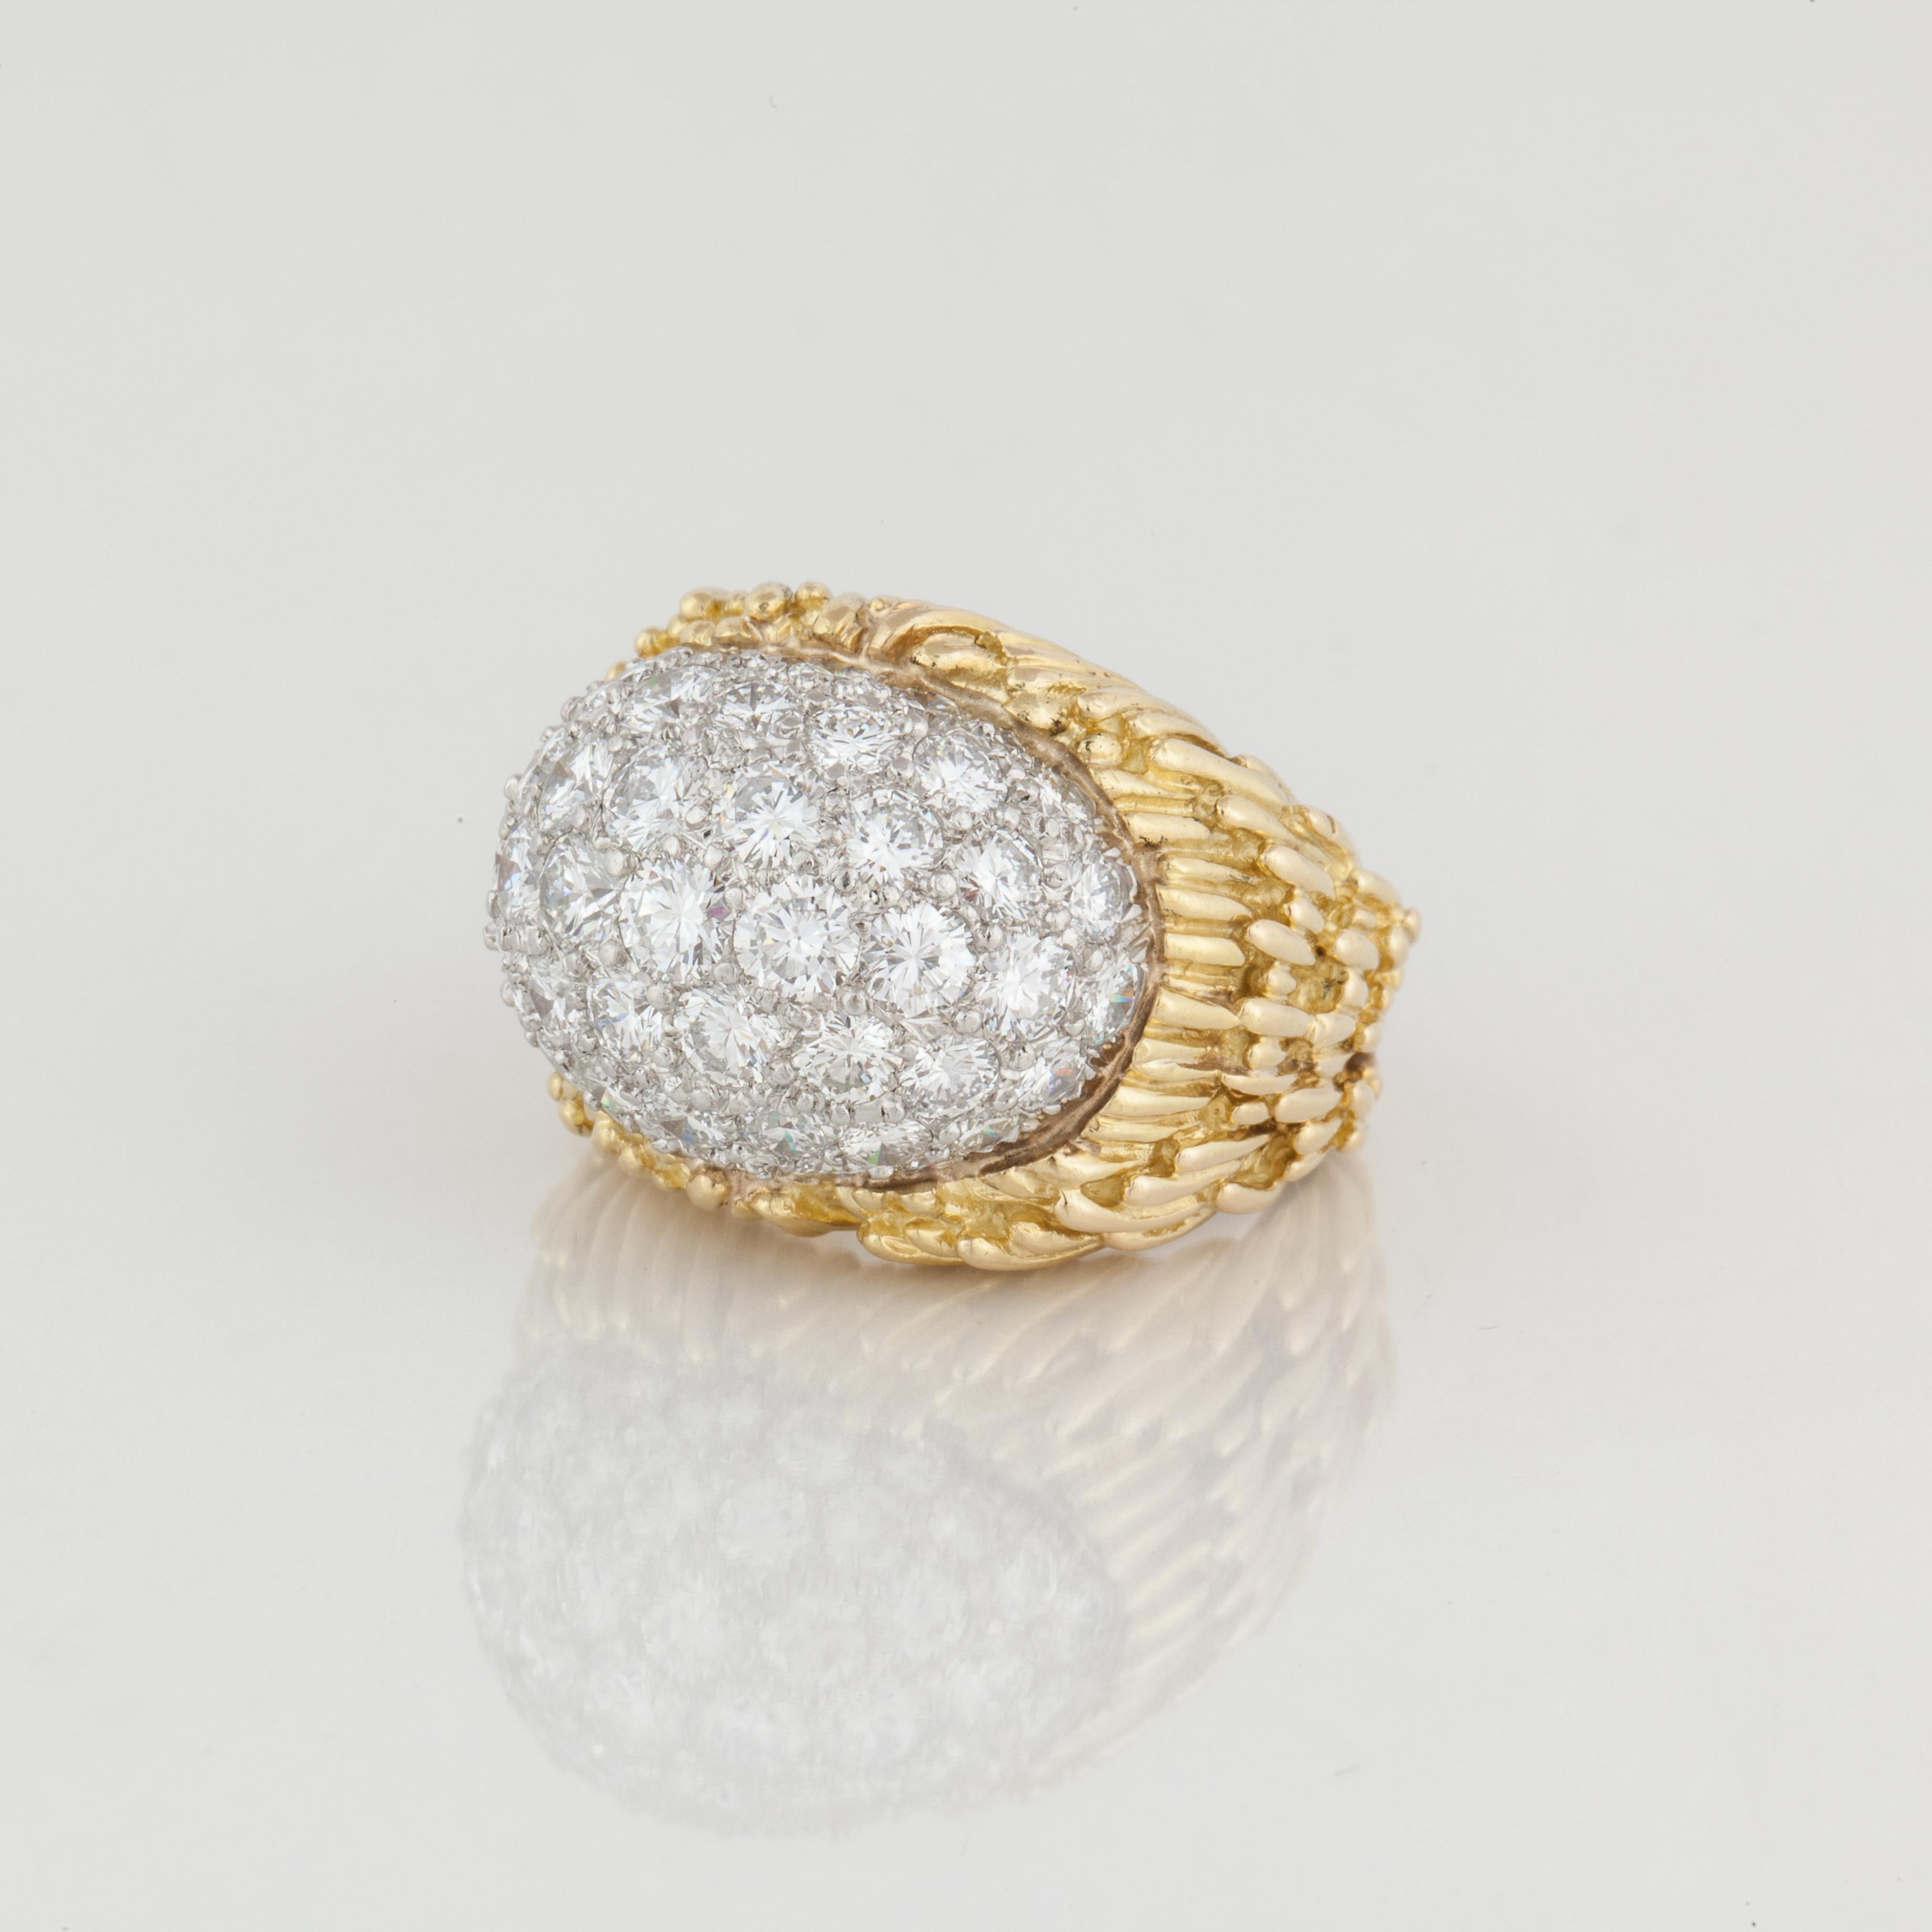 Vintage 18K yellow gold dome ring by David Webb.  Textured gold finish featuring 50 round brilliant-cut diamonds that total 5.50 carats; G-H color and VVS-VS clarity.  The diamonds are set in platinum.  The ring is a size 7 with a butterfly insert. 